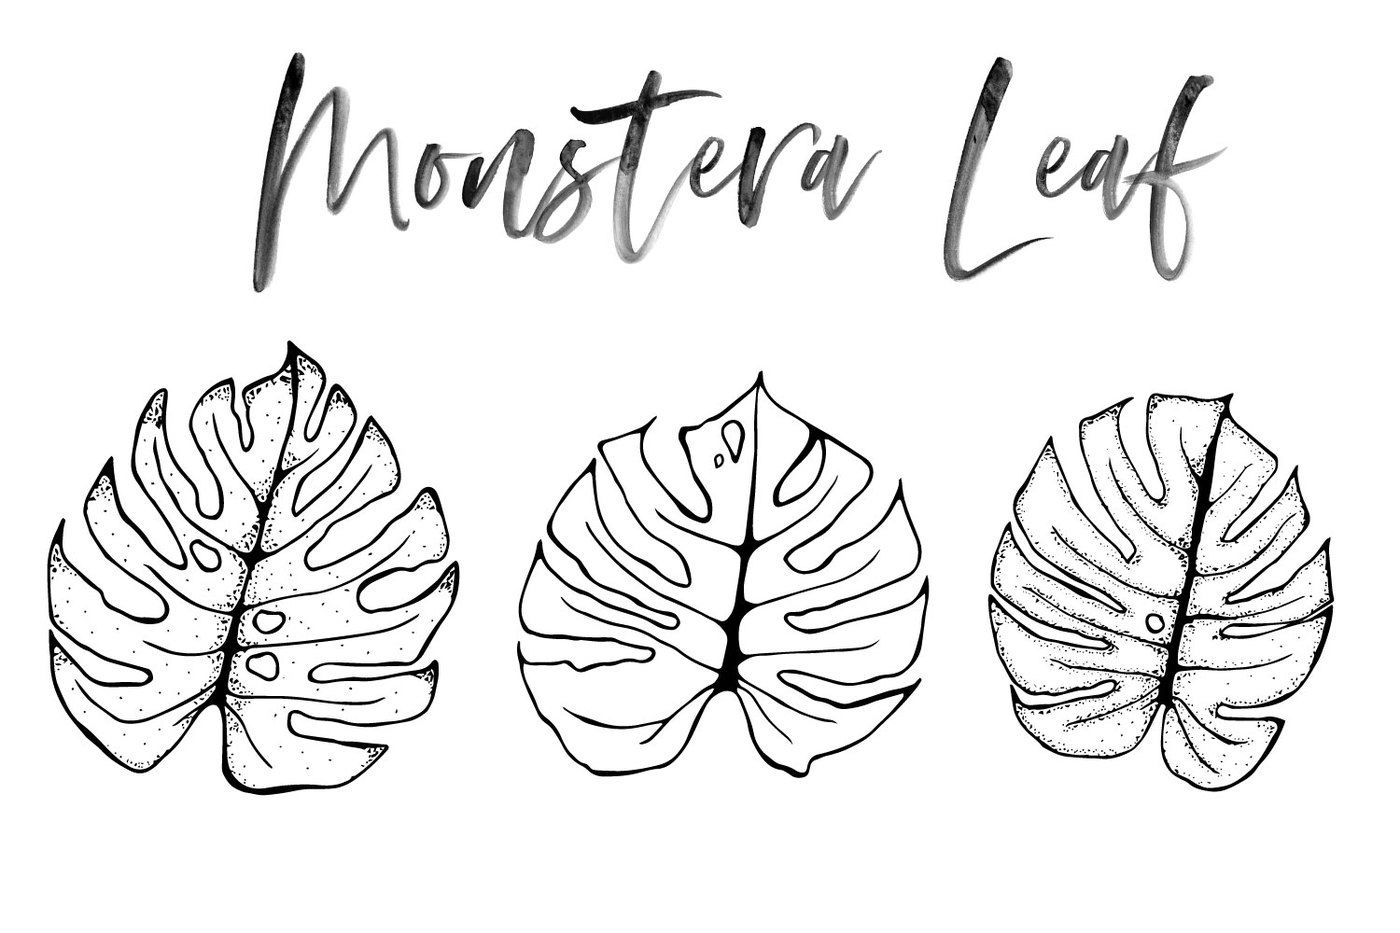 How To Draw A Monstera Leaf 14. 